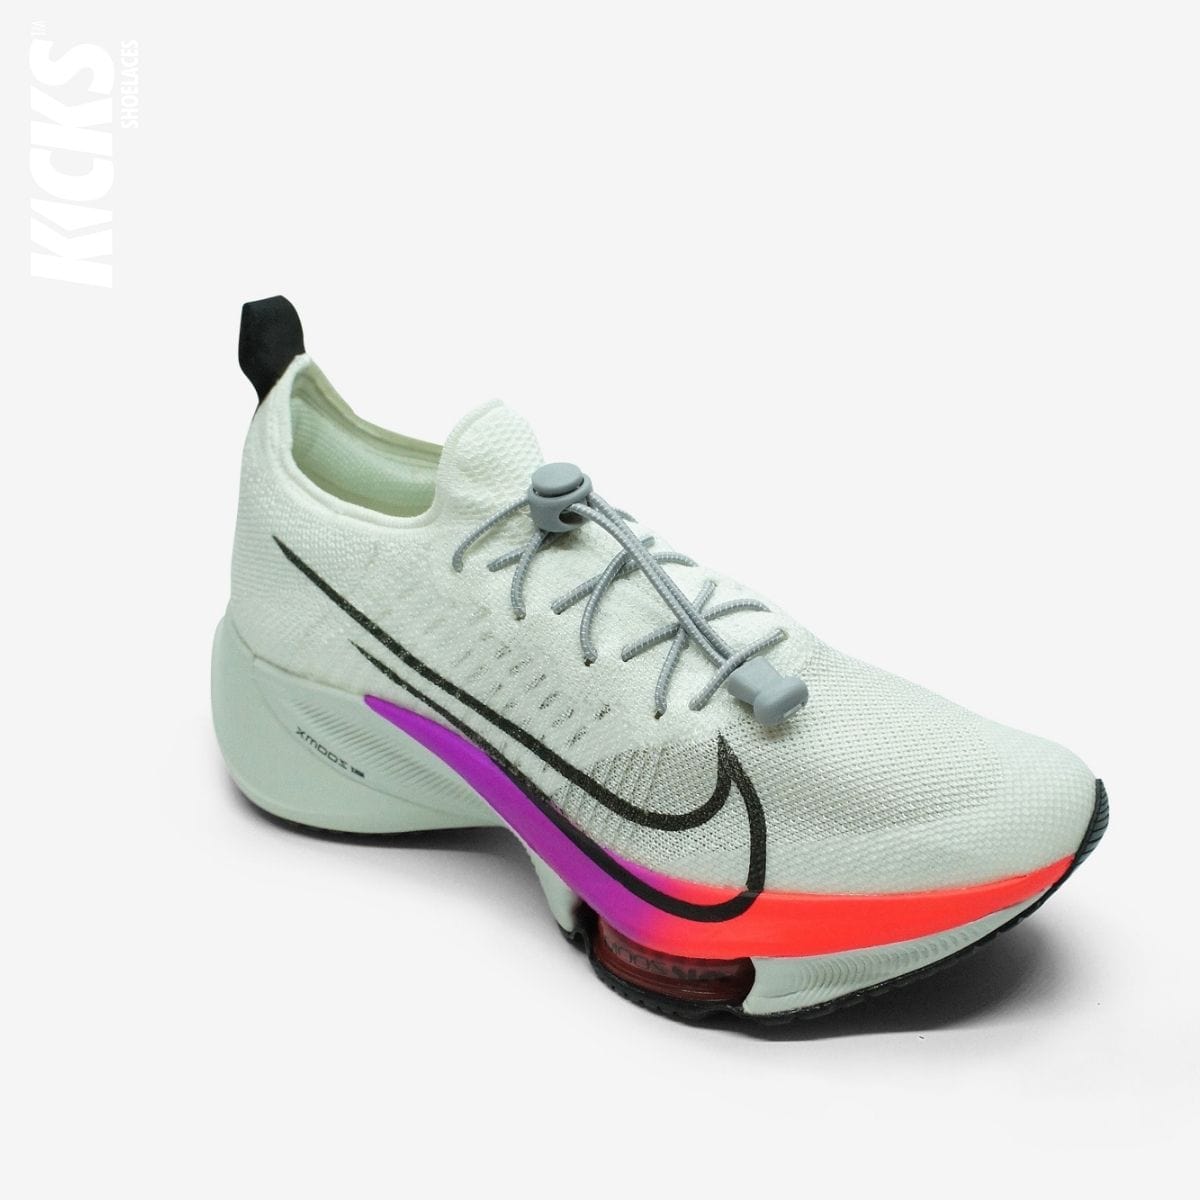 quick-laces-with-grey-elastic-no-tie-shoelaces-on-nike-running-shoe-by-kicks-shoelaces